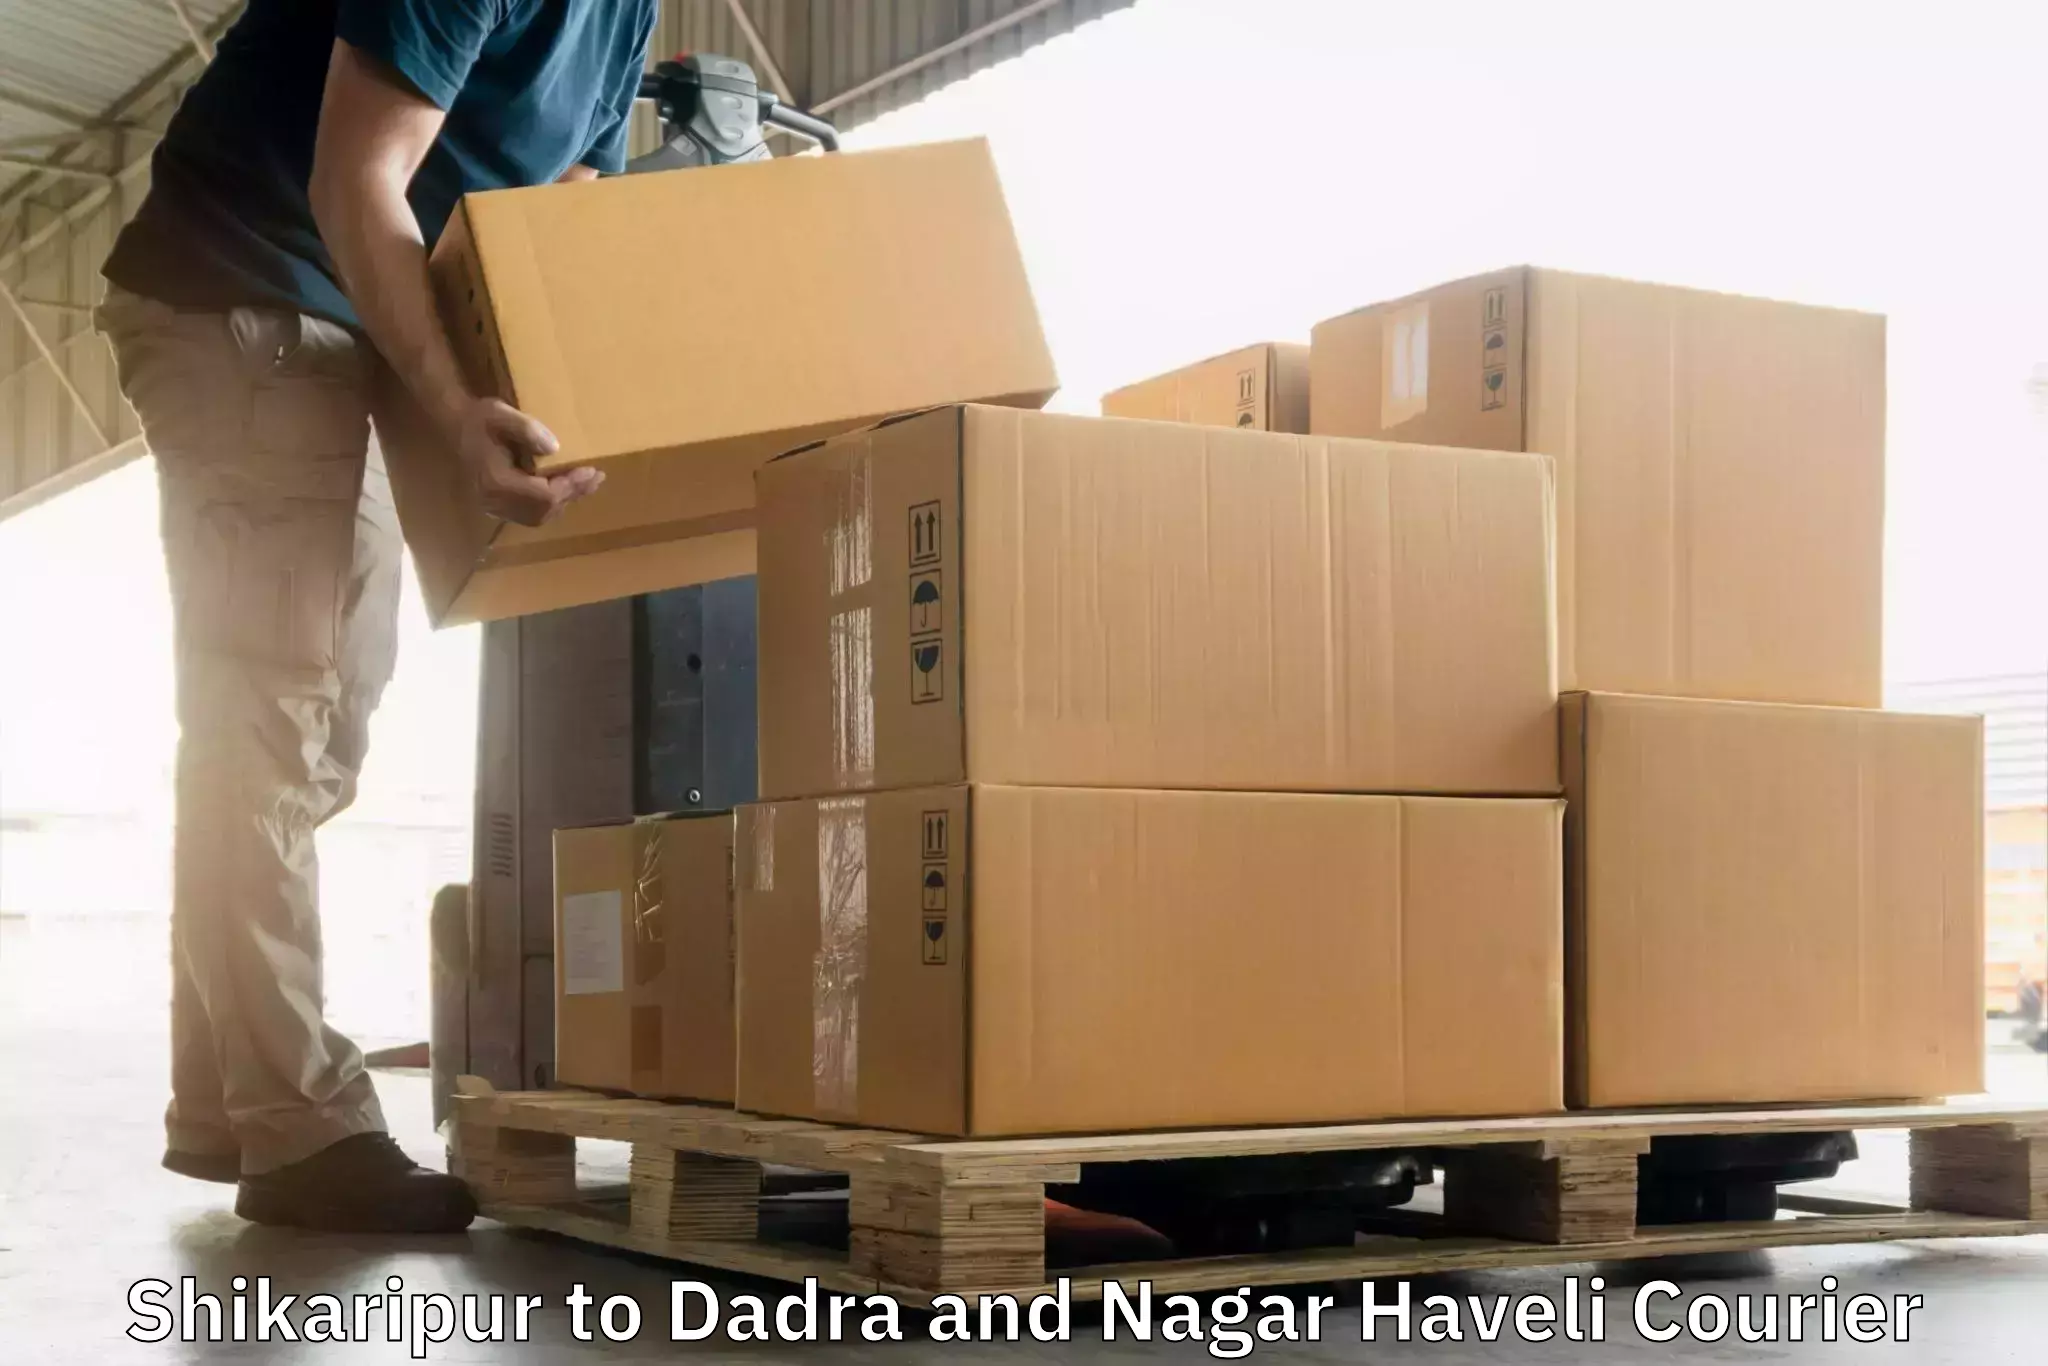 Flexible delivery schedules in Shikaripur to Dadra and Nagar Haveli